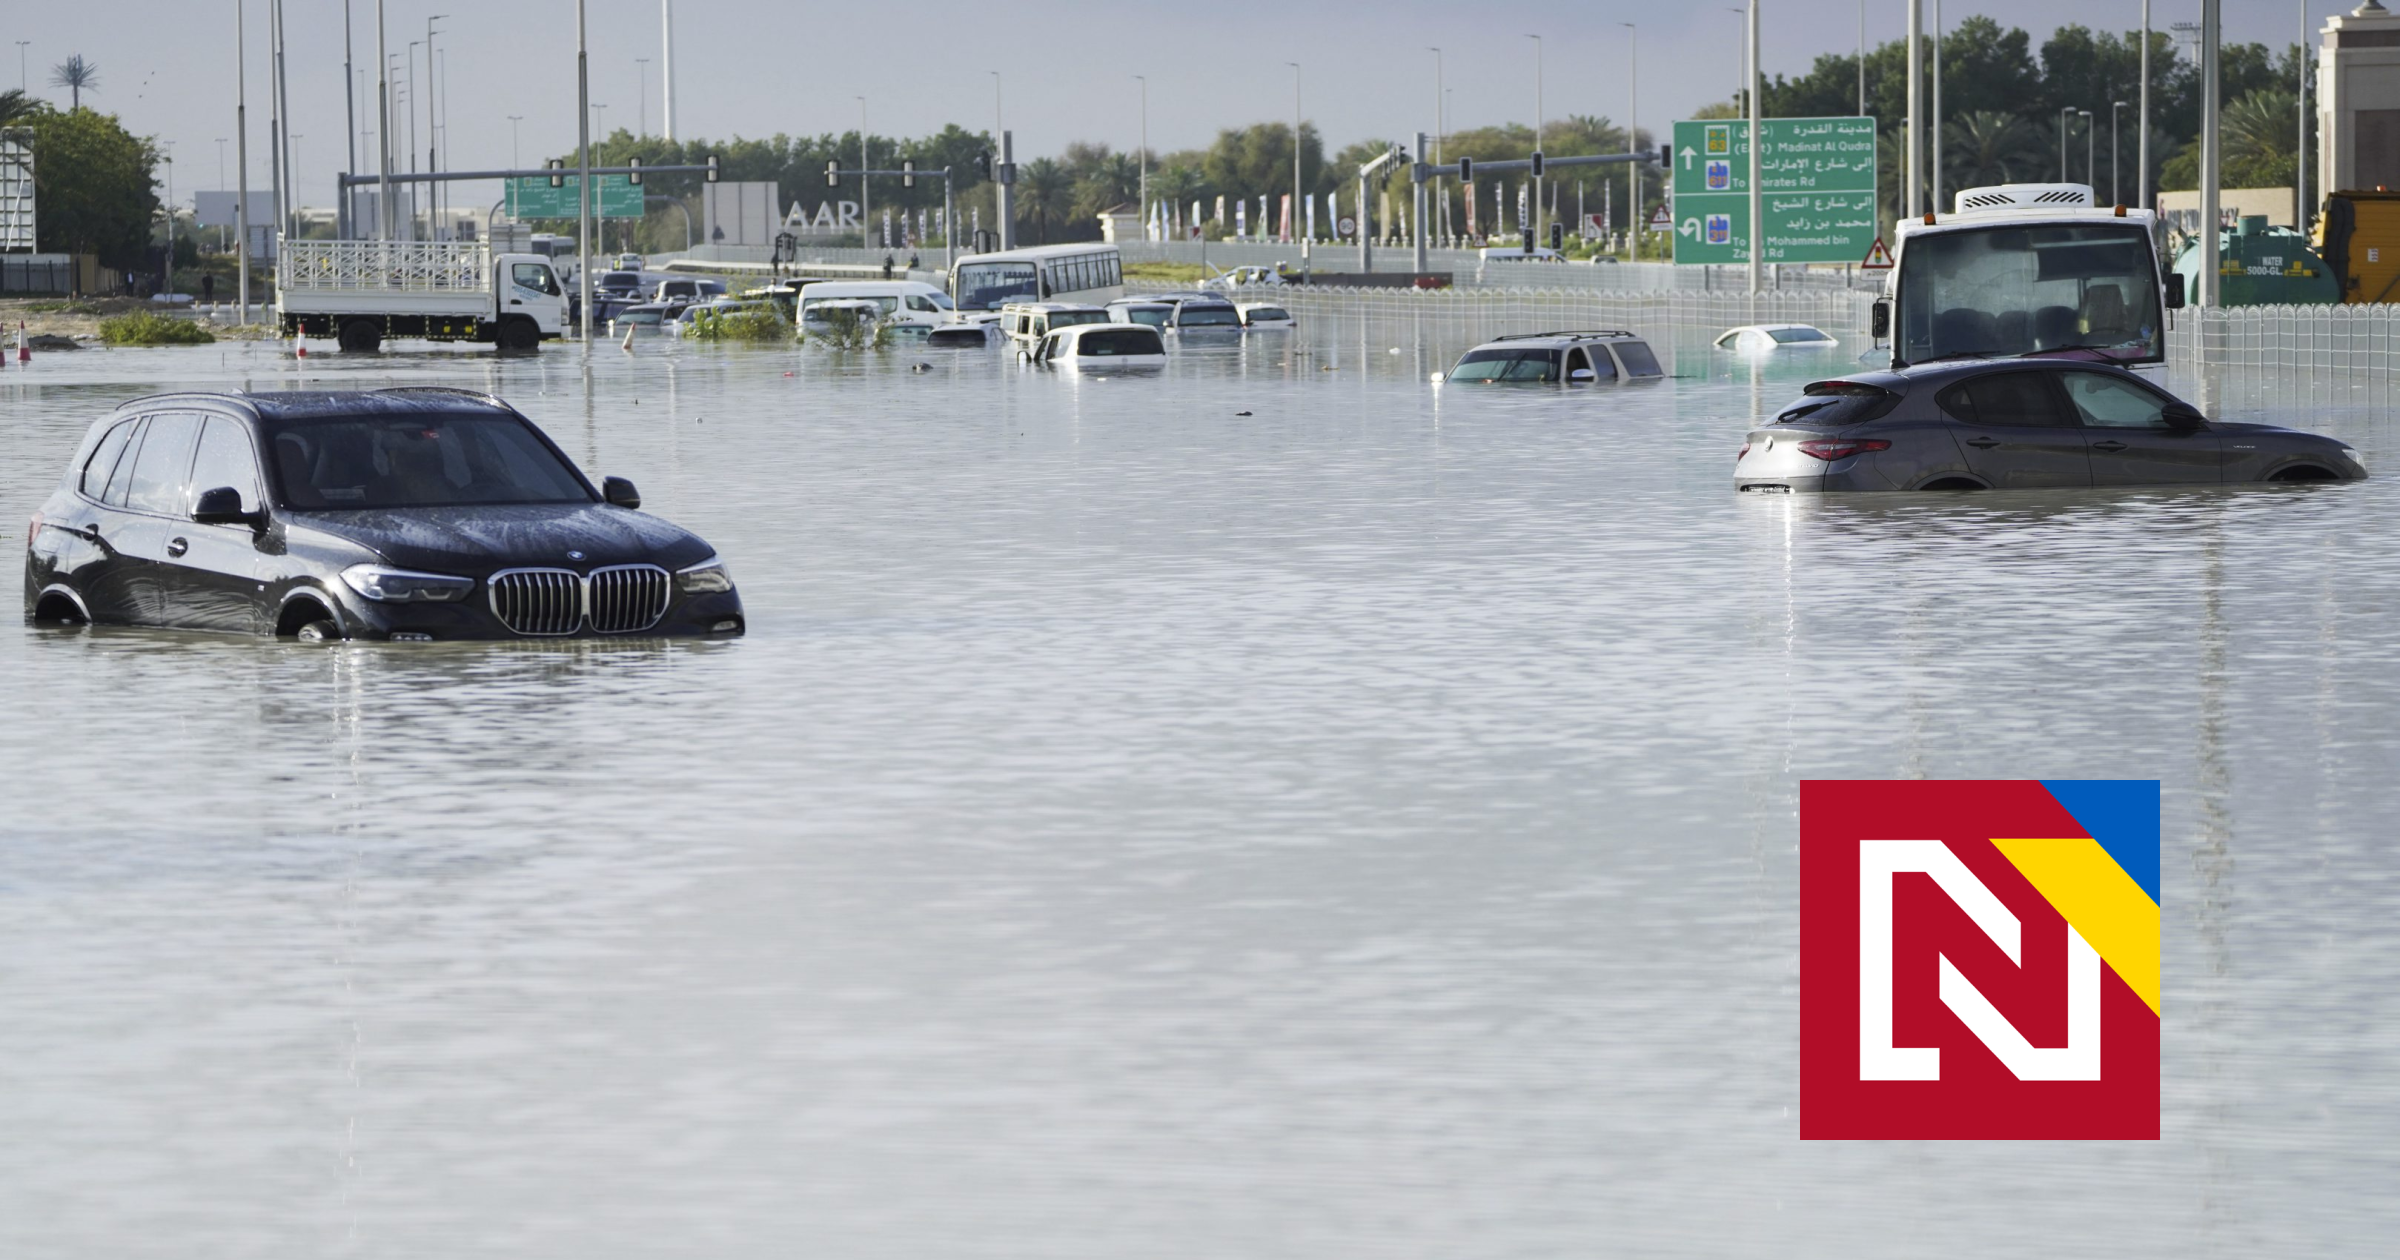 They linked the floods in Dubai to artificially induced rain.  What does the evidence say?